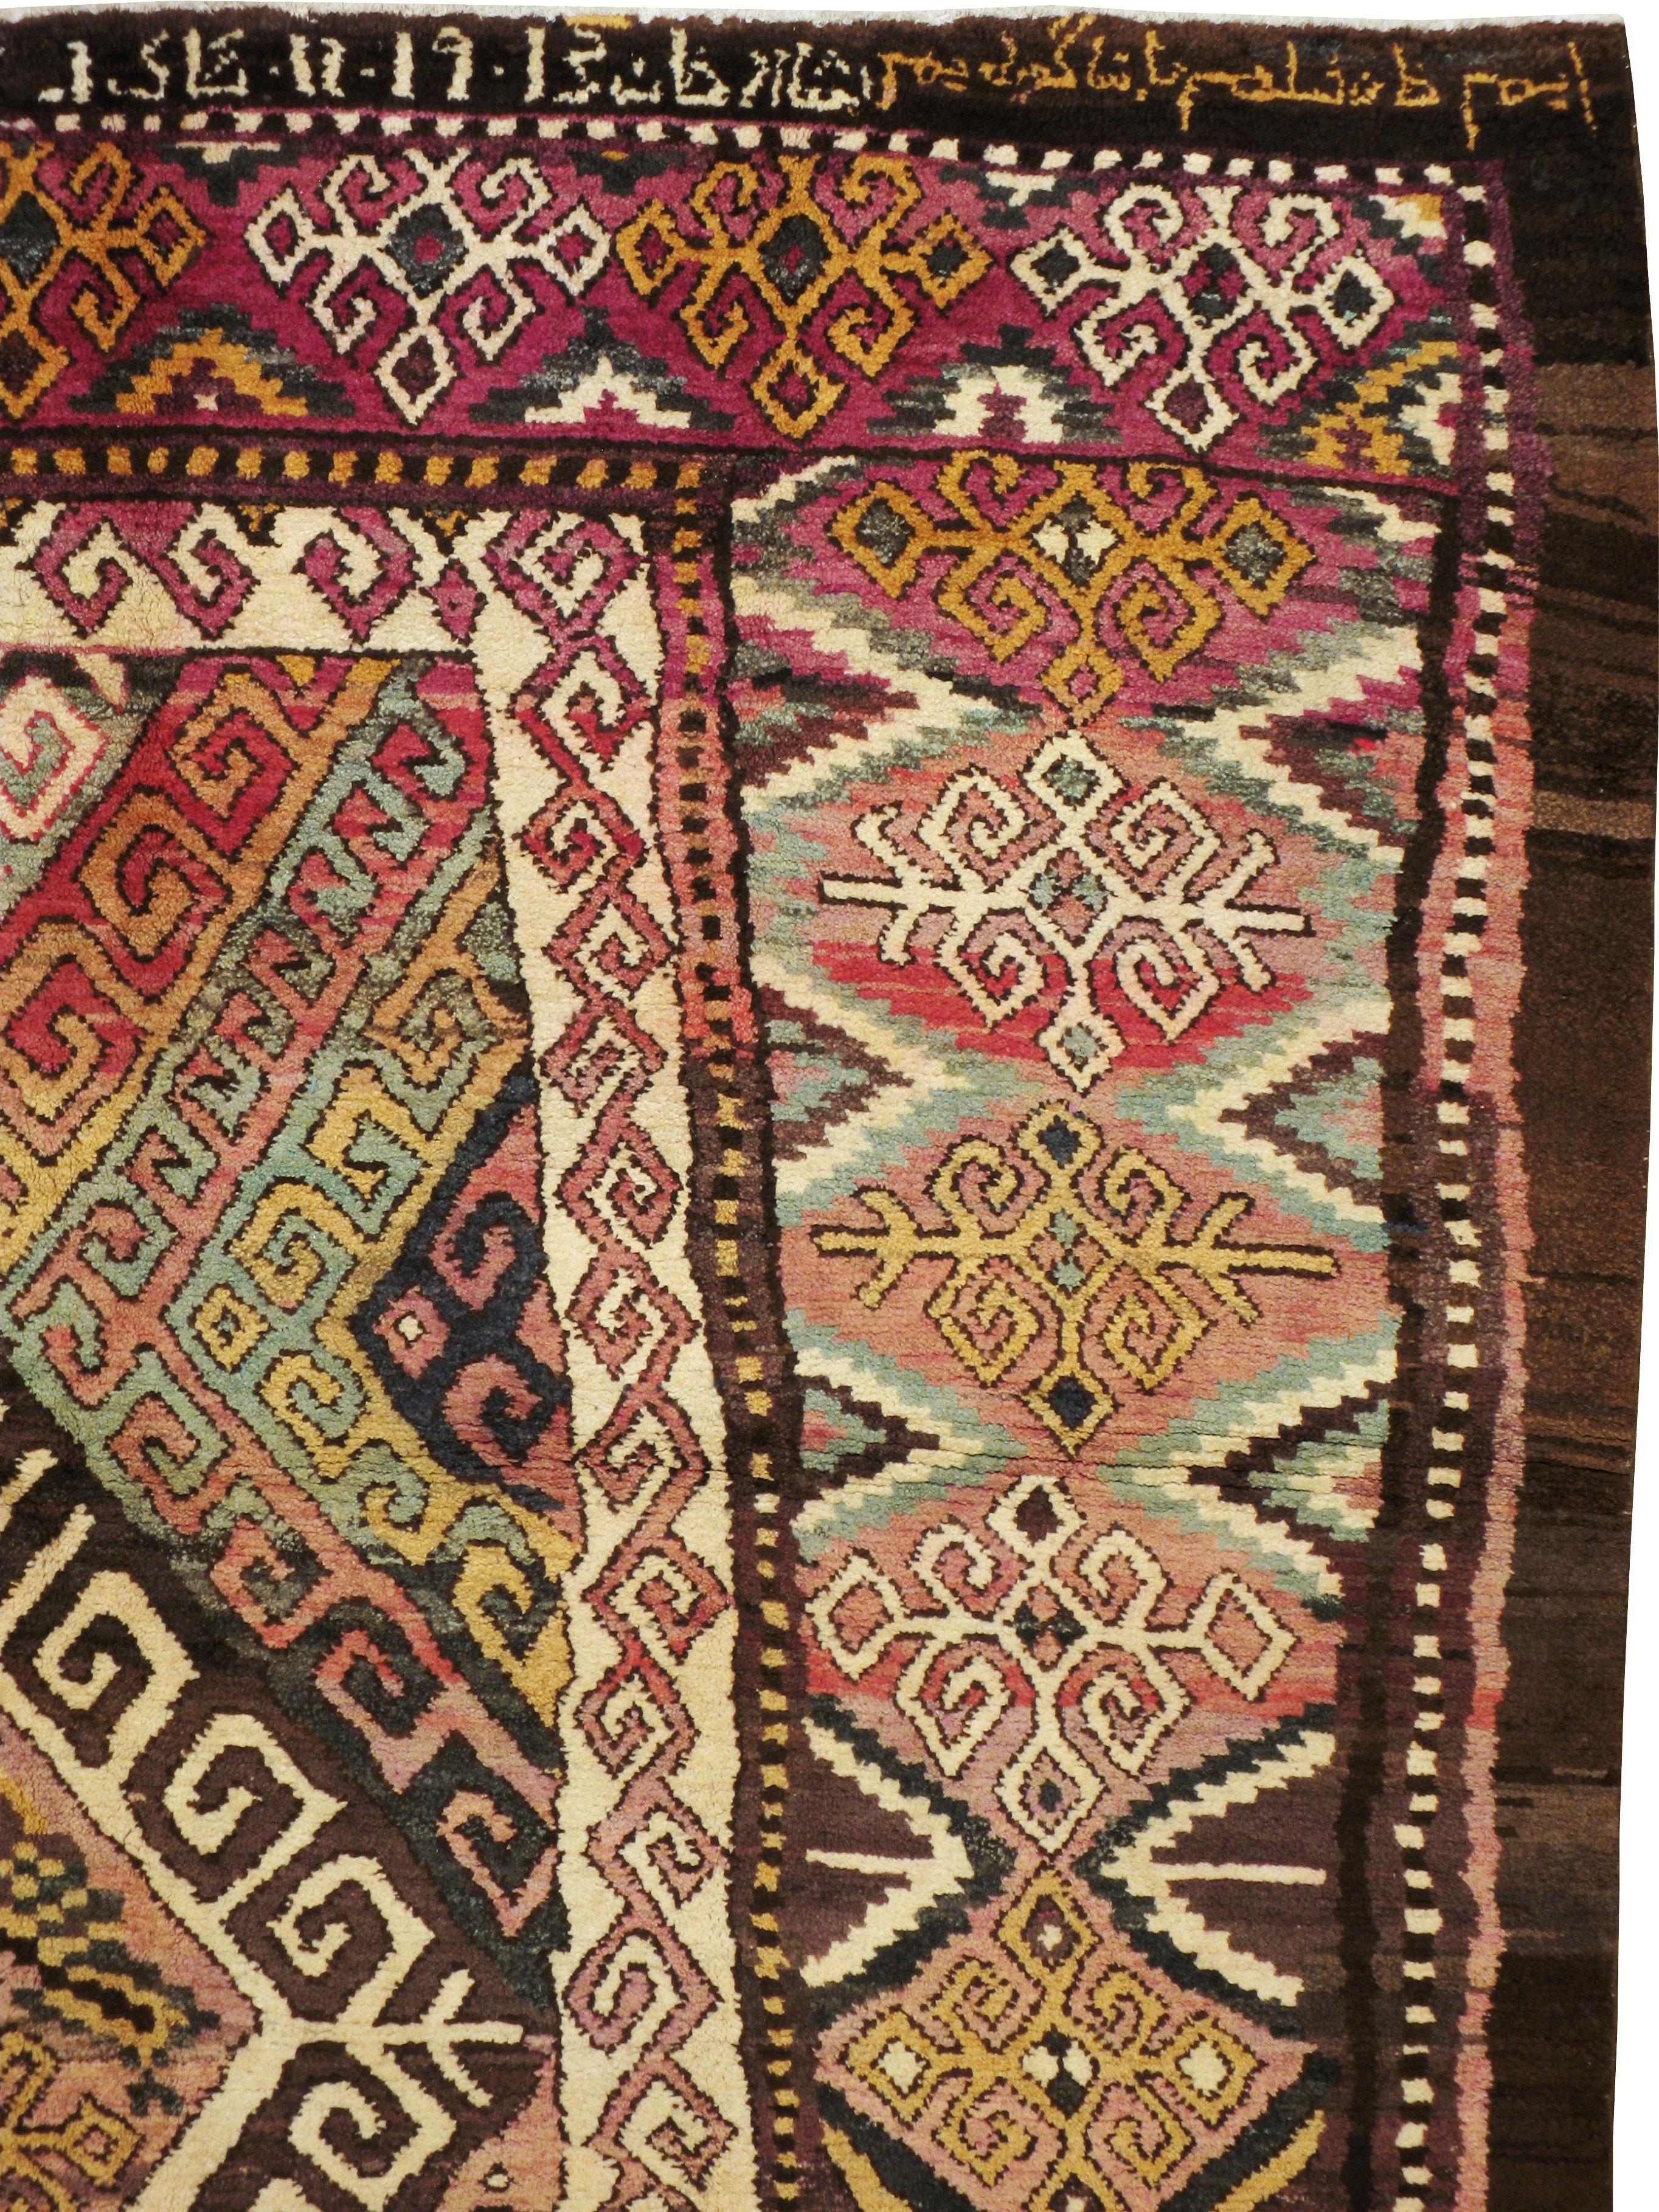 An antique Persian Kurdish accent rug from the early 20th century with an abstract multicolored pattern. The size, design, and colors are all very unique and rare characteristics for a nomadic and tribal origin and for this time period.